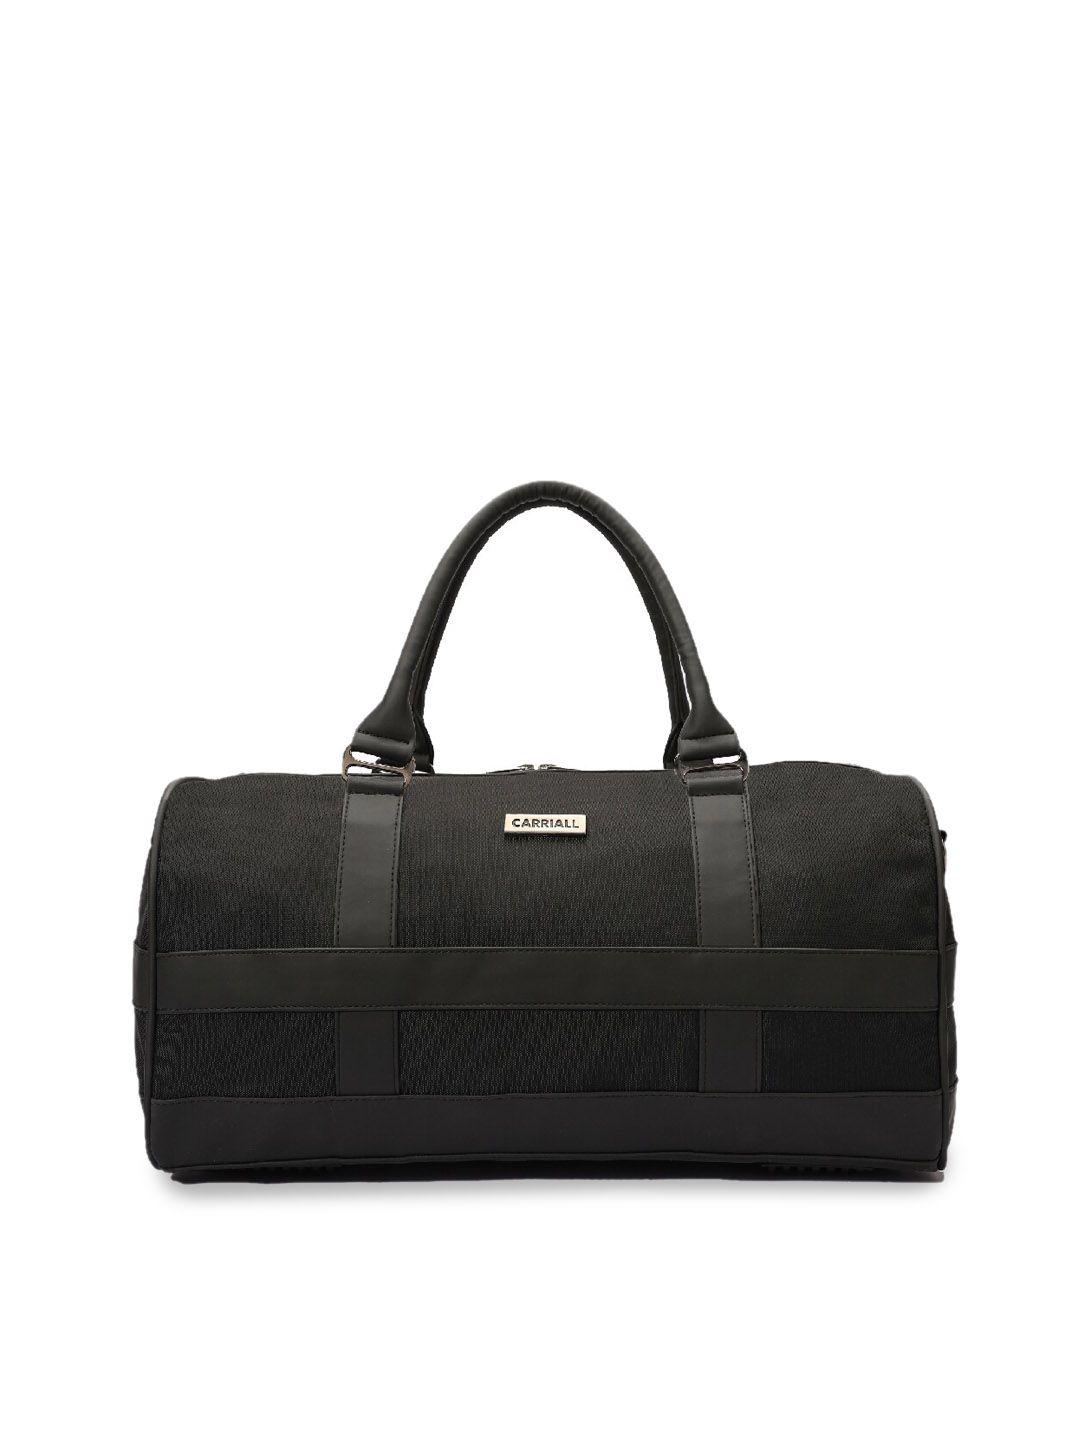 carriall travel duffle bag